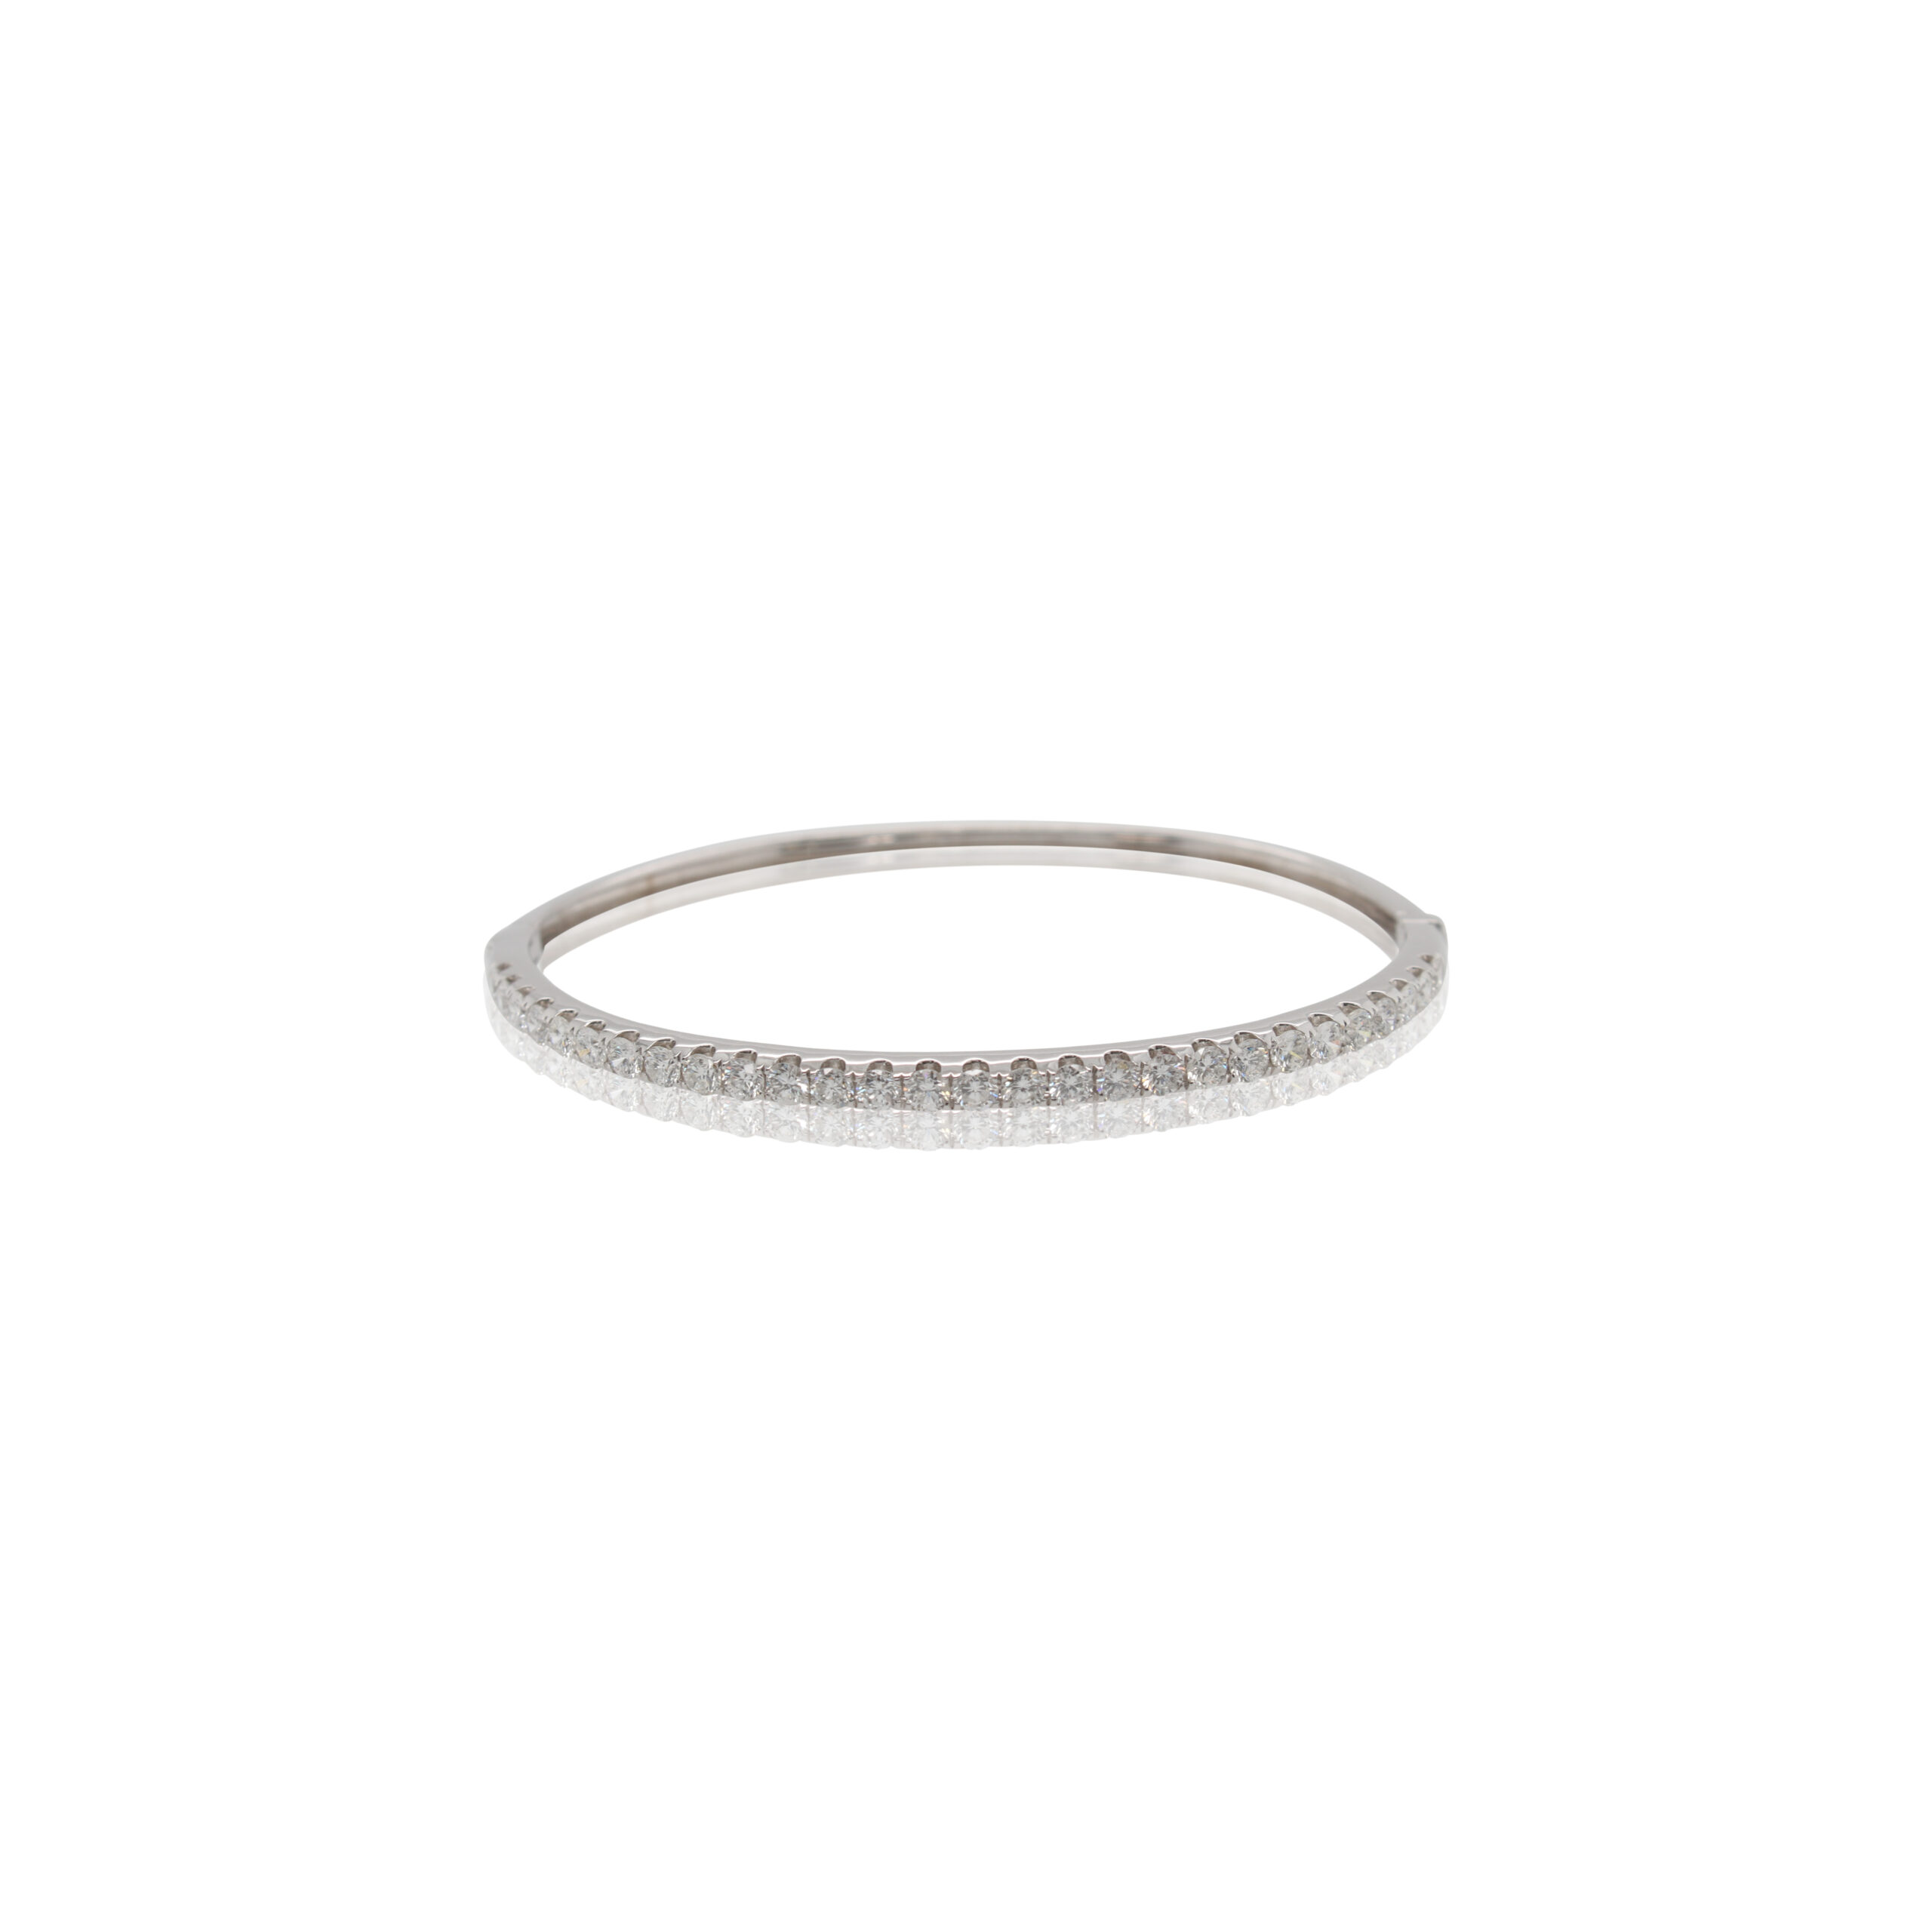 This bracelet from In Style by Rafael is crafted from 14k white gold and features 1.95 total carats of diamonds.